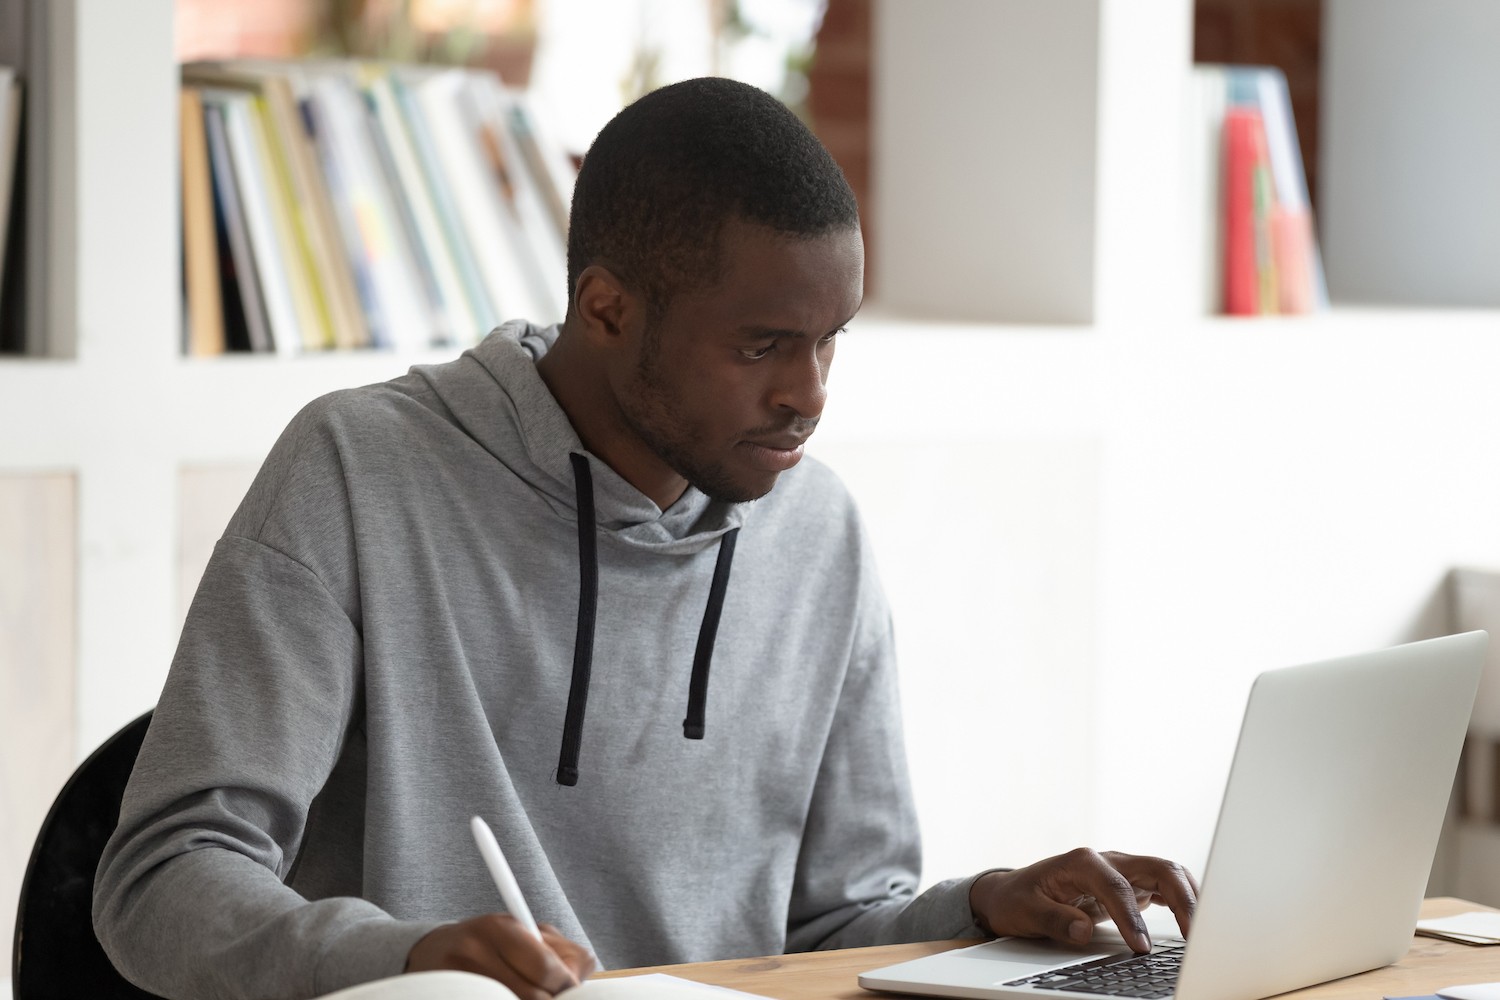 Image of a young black man working at a computer and writing with a pen.